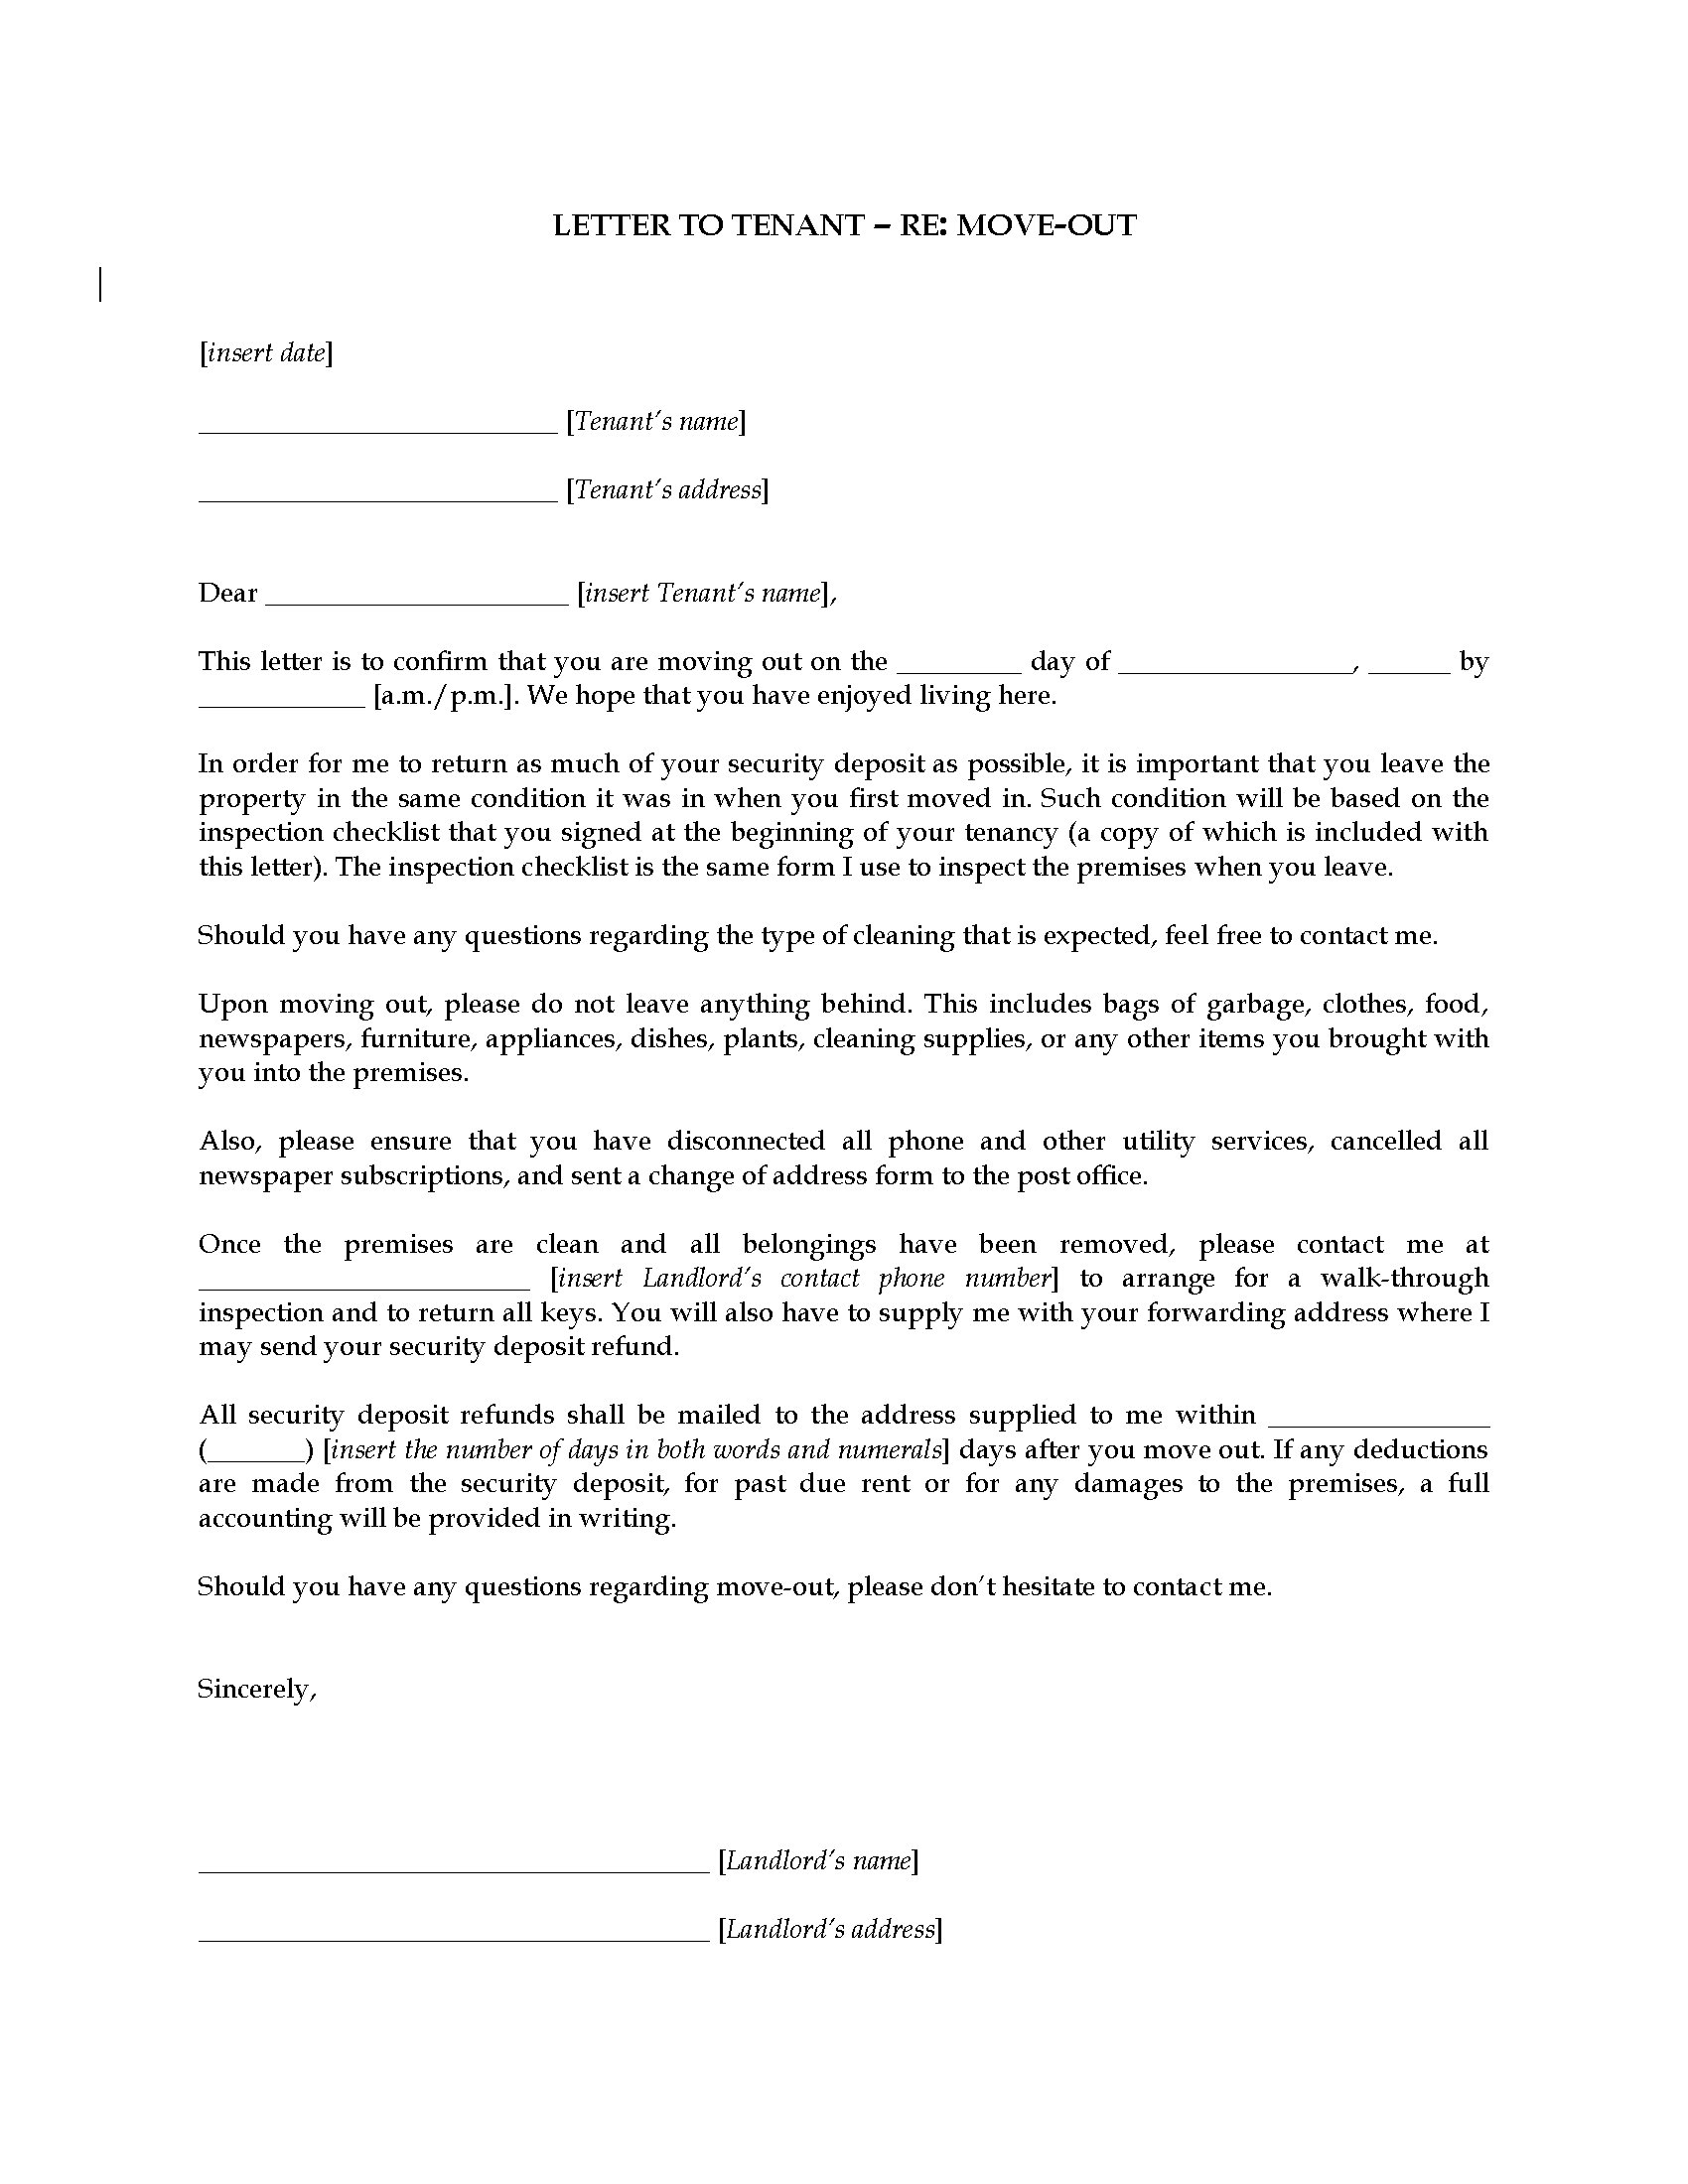 Sample Lease Termination Letter From Landlord To Tenant from www.megadox.com